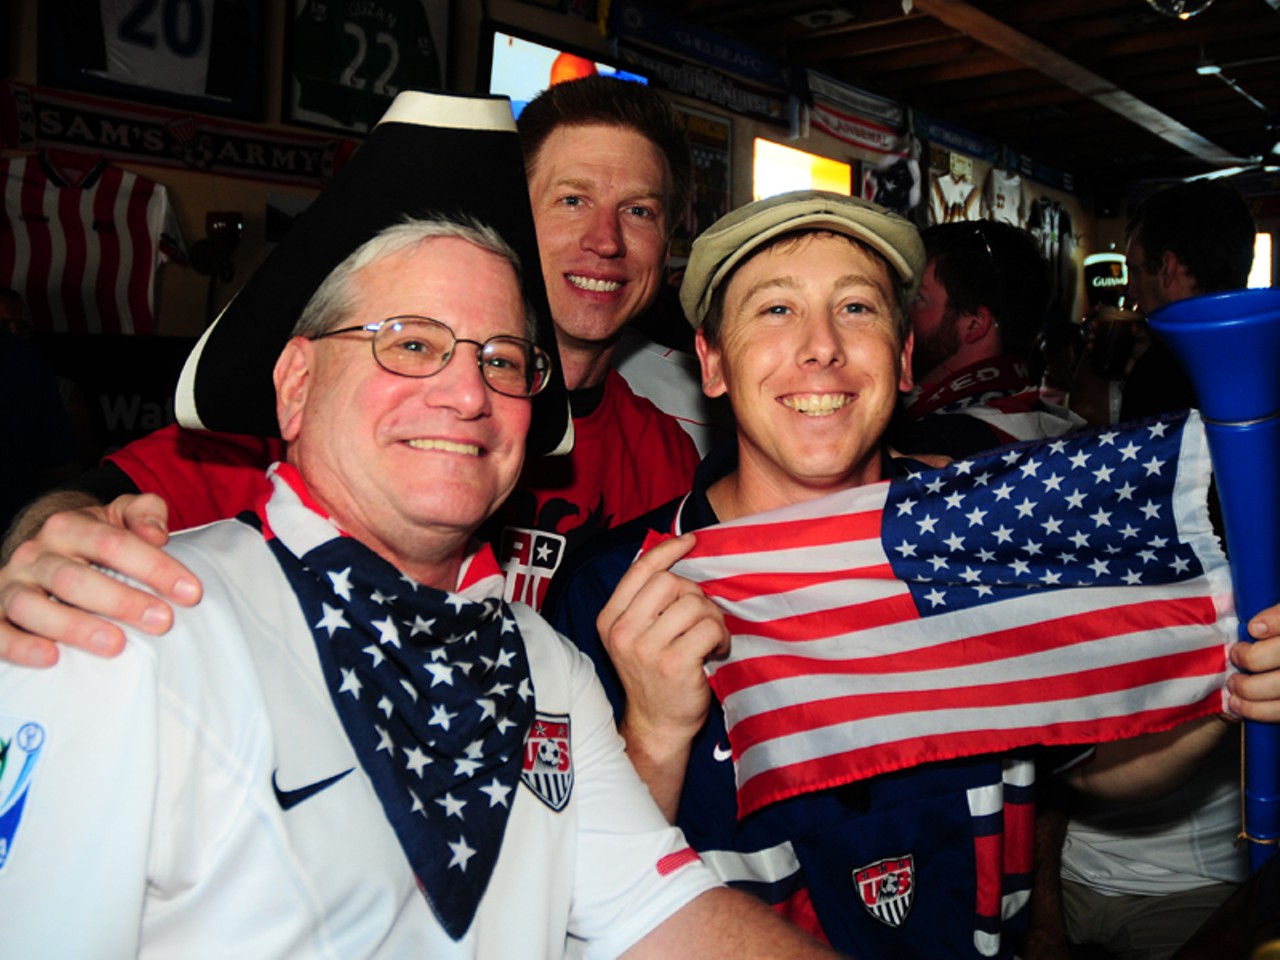 Bob (130 soccer jerseys), Steve, Mark, One beer in, 7:30 a.m., reserved a seat at a bar.